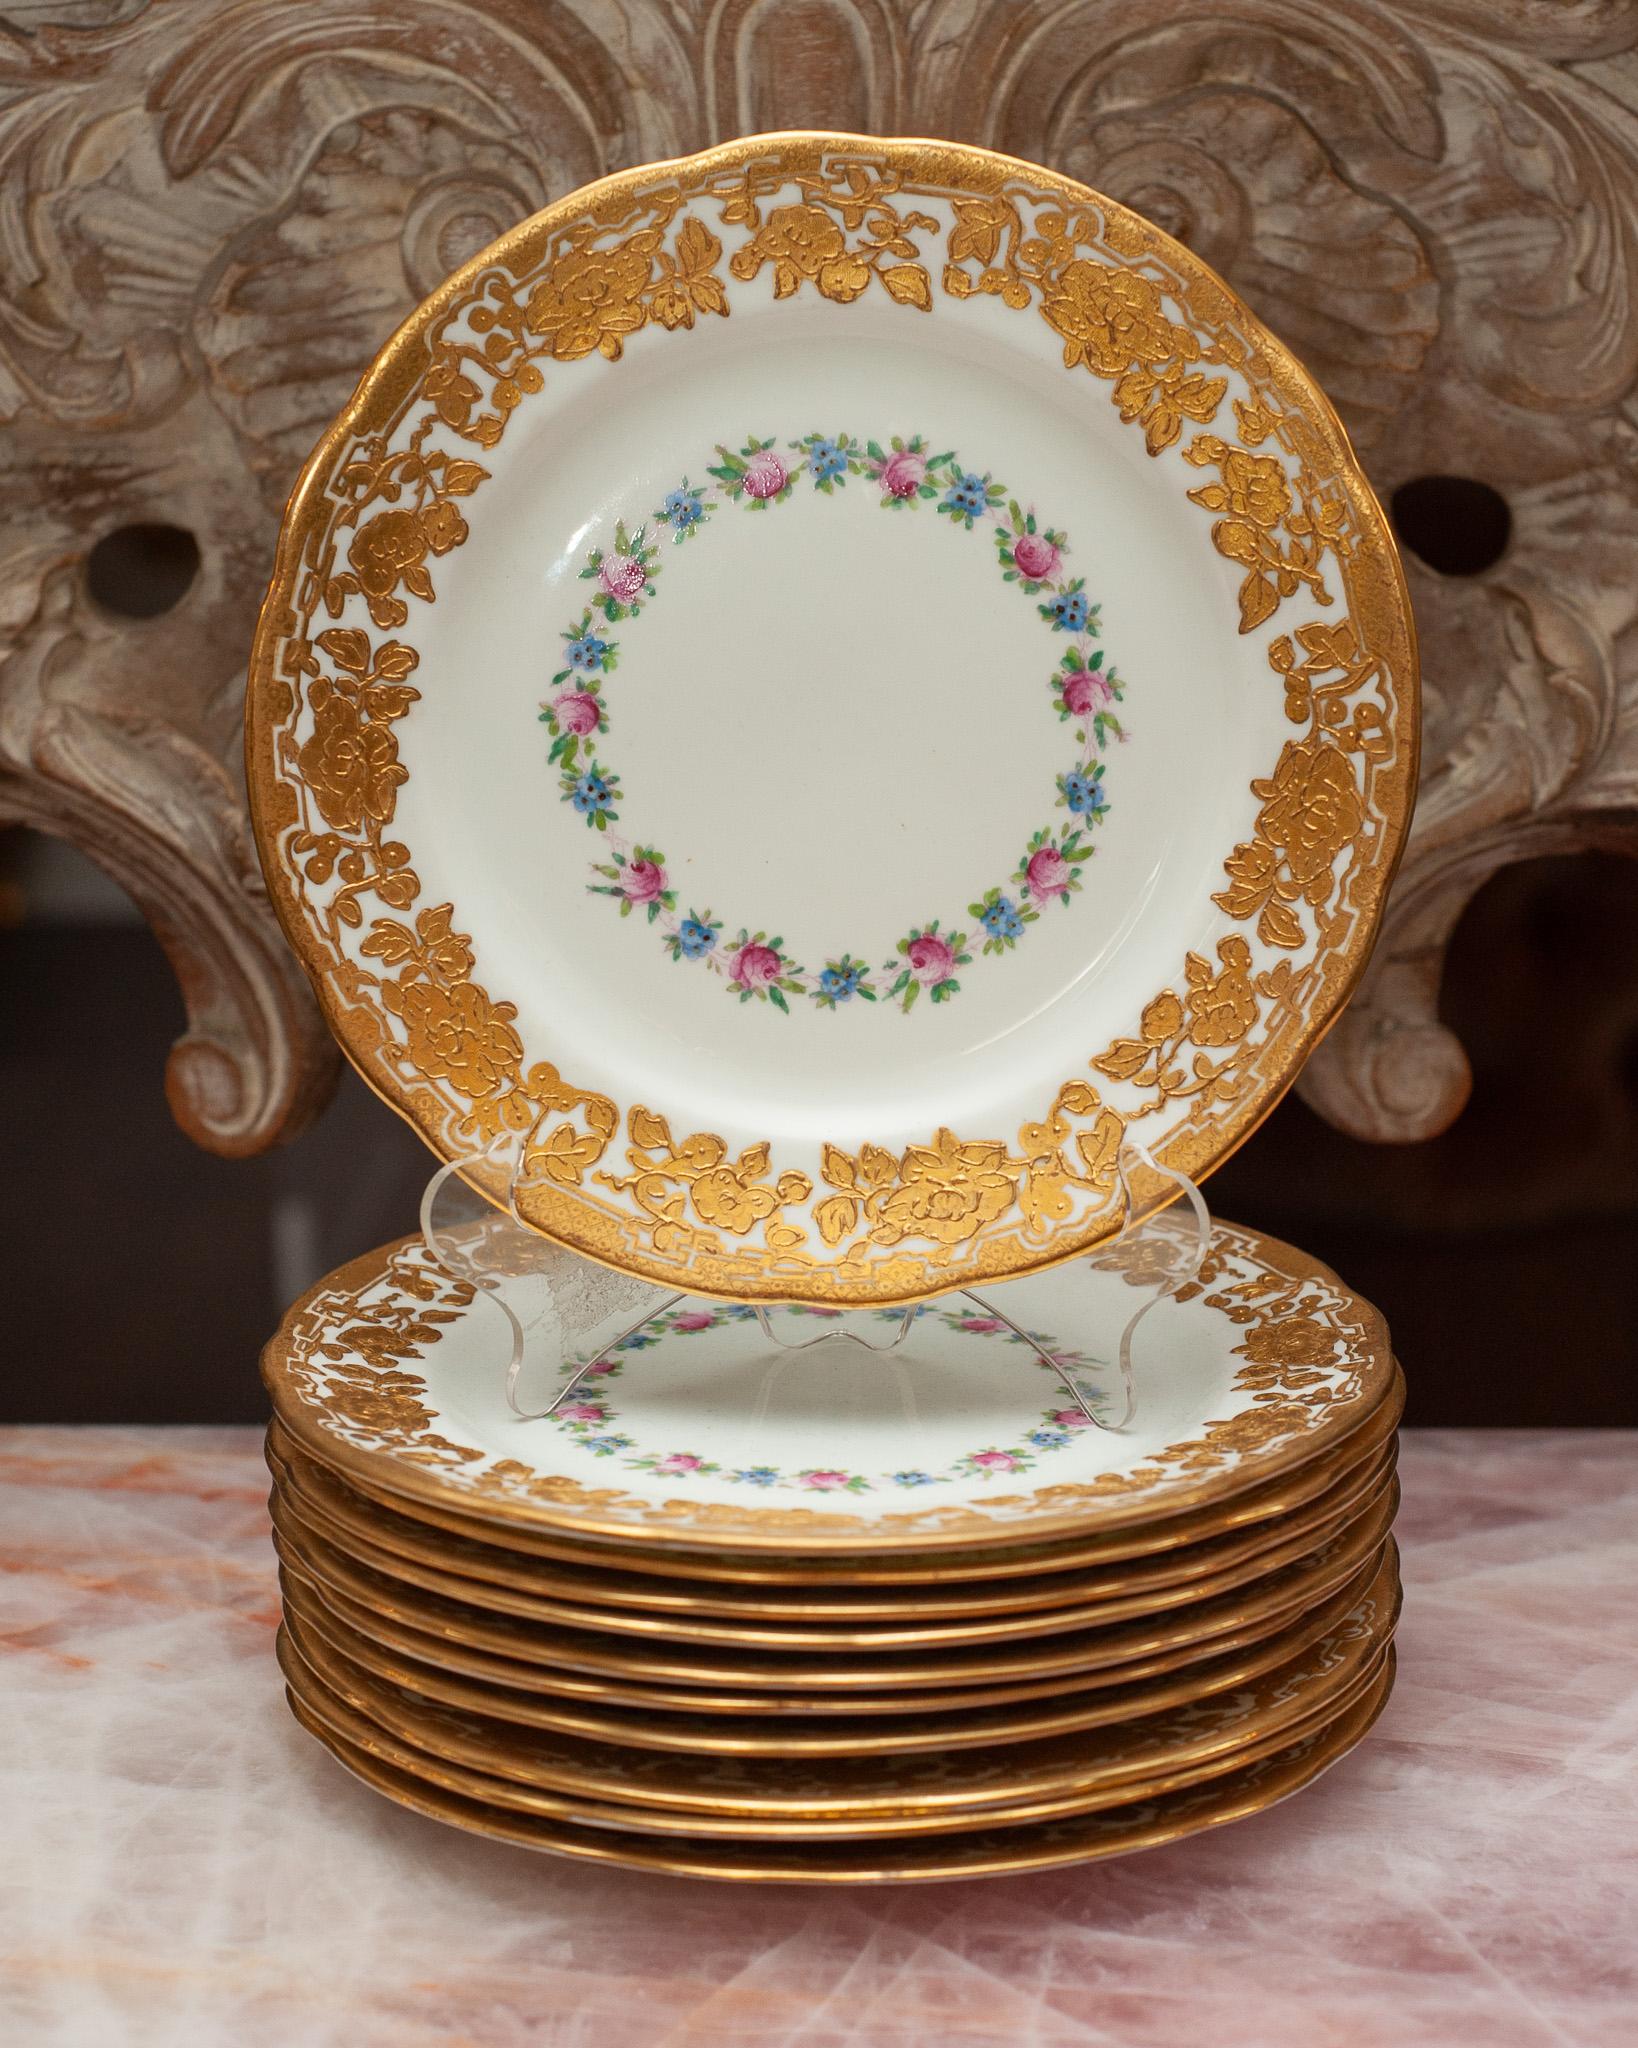 An antique set of 11 Ovington Brothers dessert plates made by Hammersley & Co, England. Beautifully gilded gold pattern with floral design.